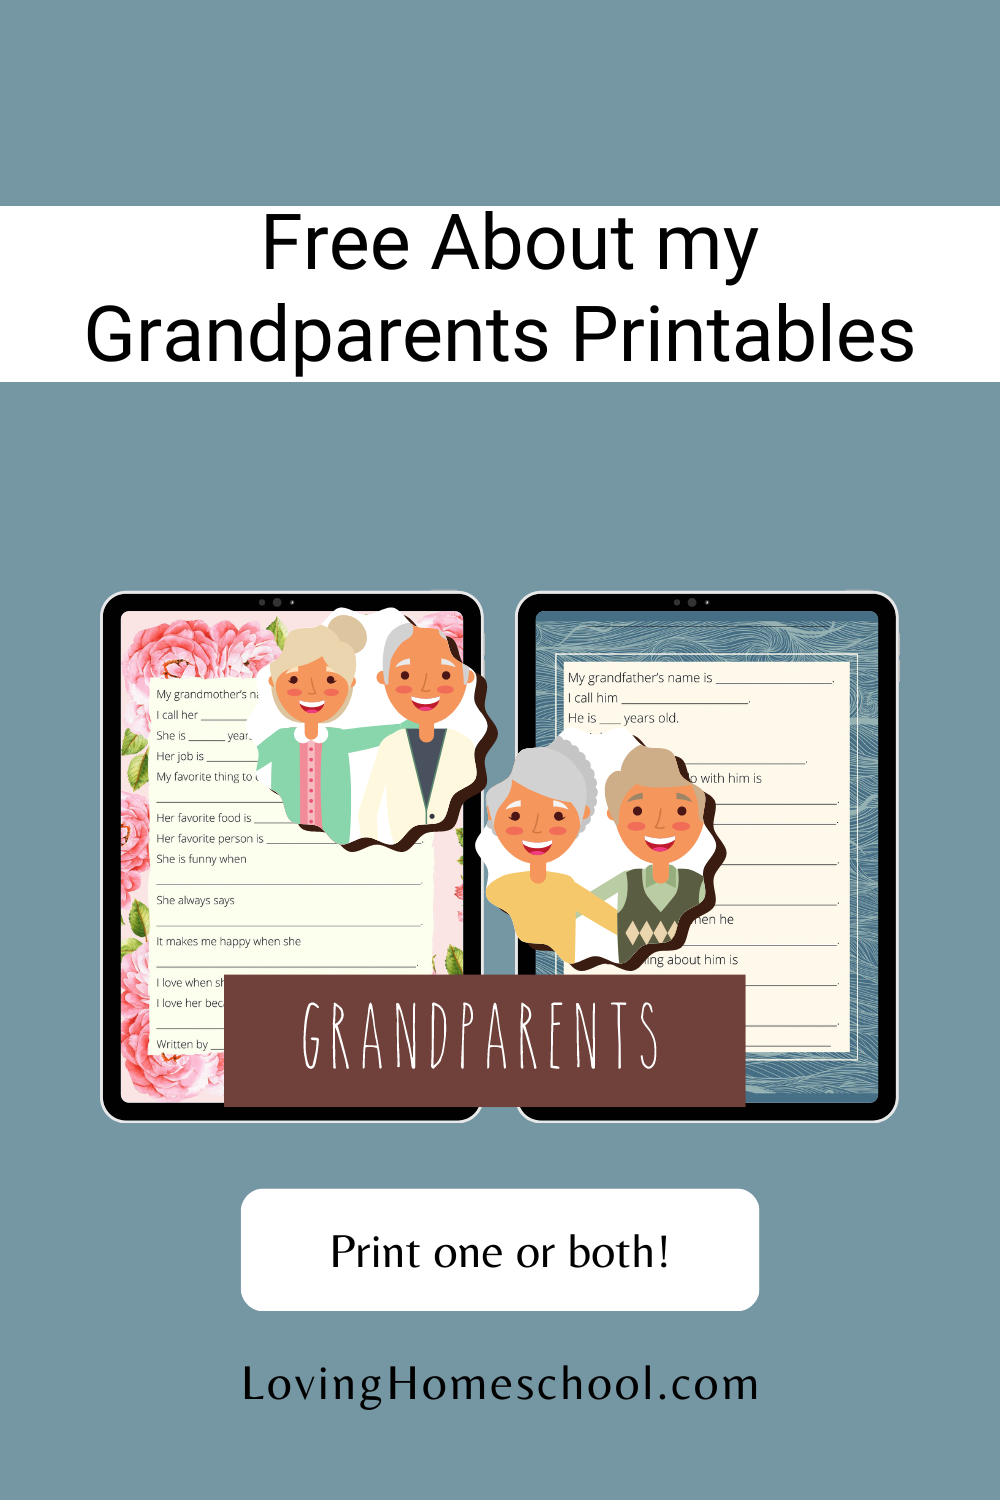 About my Grandparents Printables Pinterest Pin